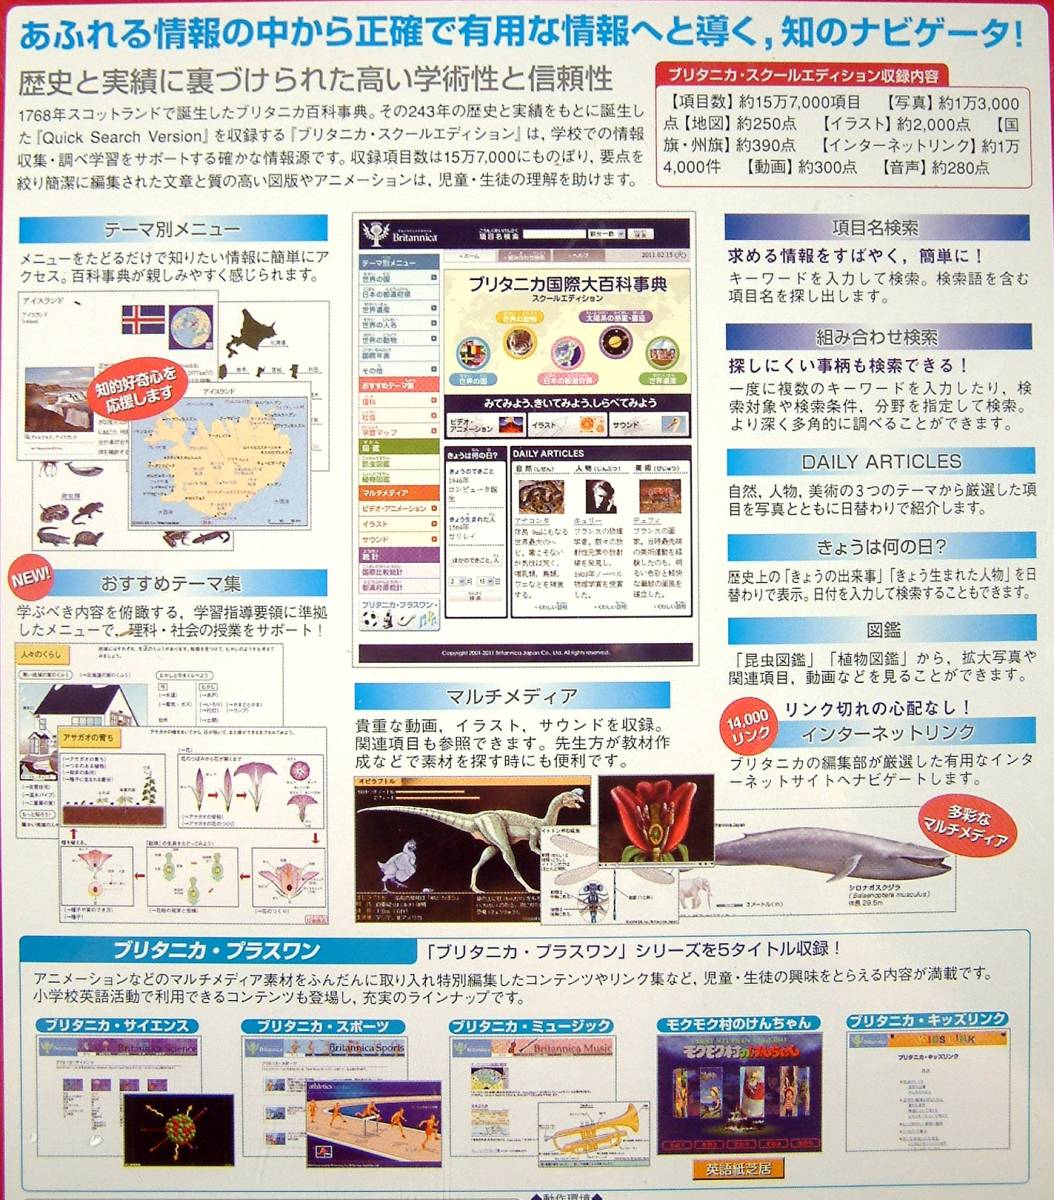 [3471] yellowtail tanika school edition 2011 network version new goods soft britannica information collection examination study education international large encyclopedia plus one 